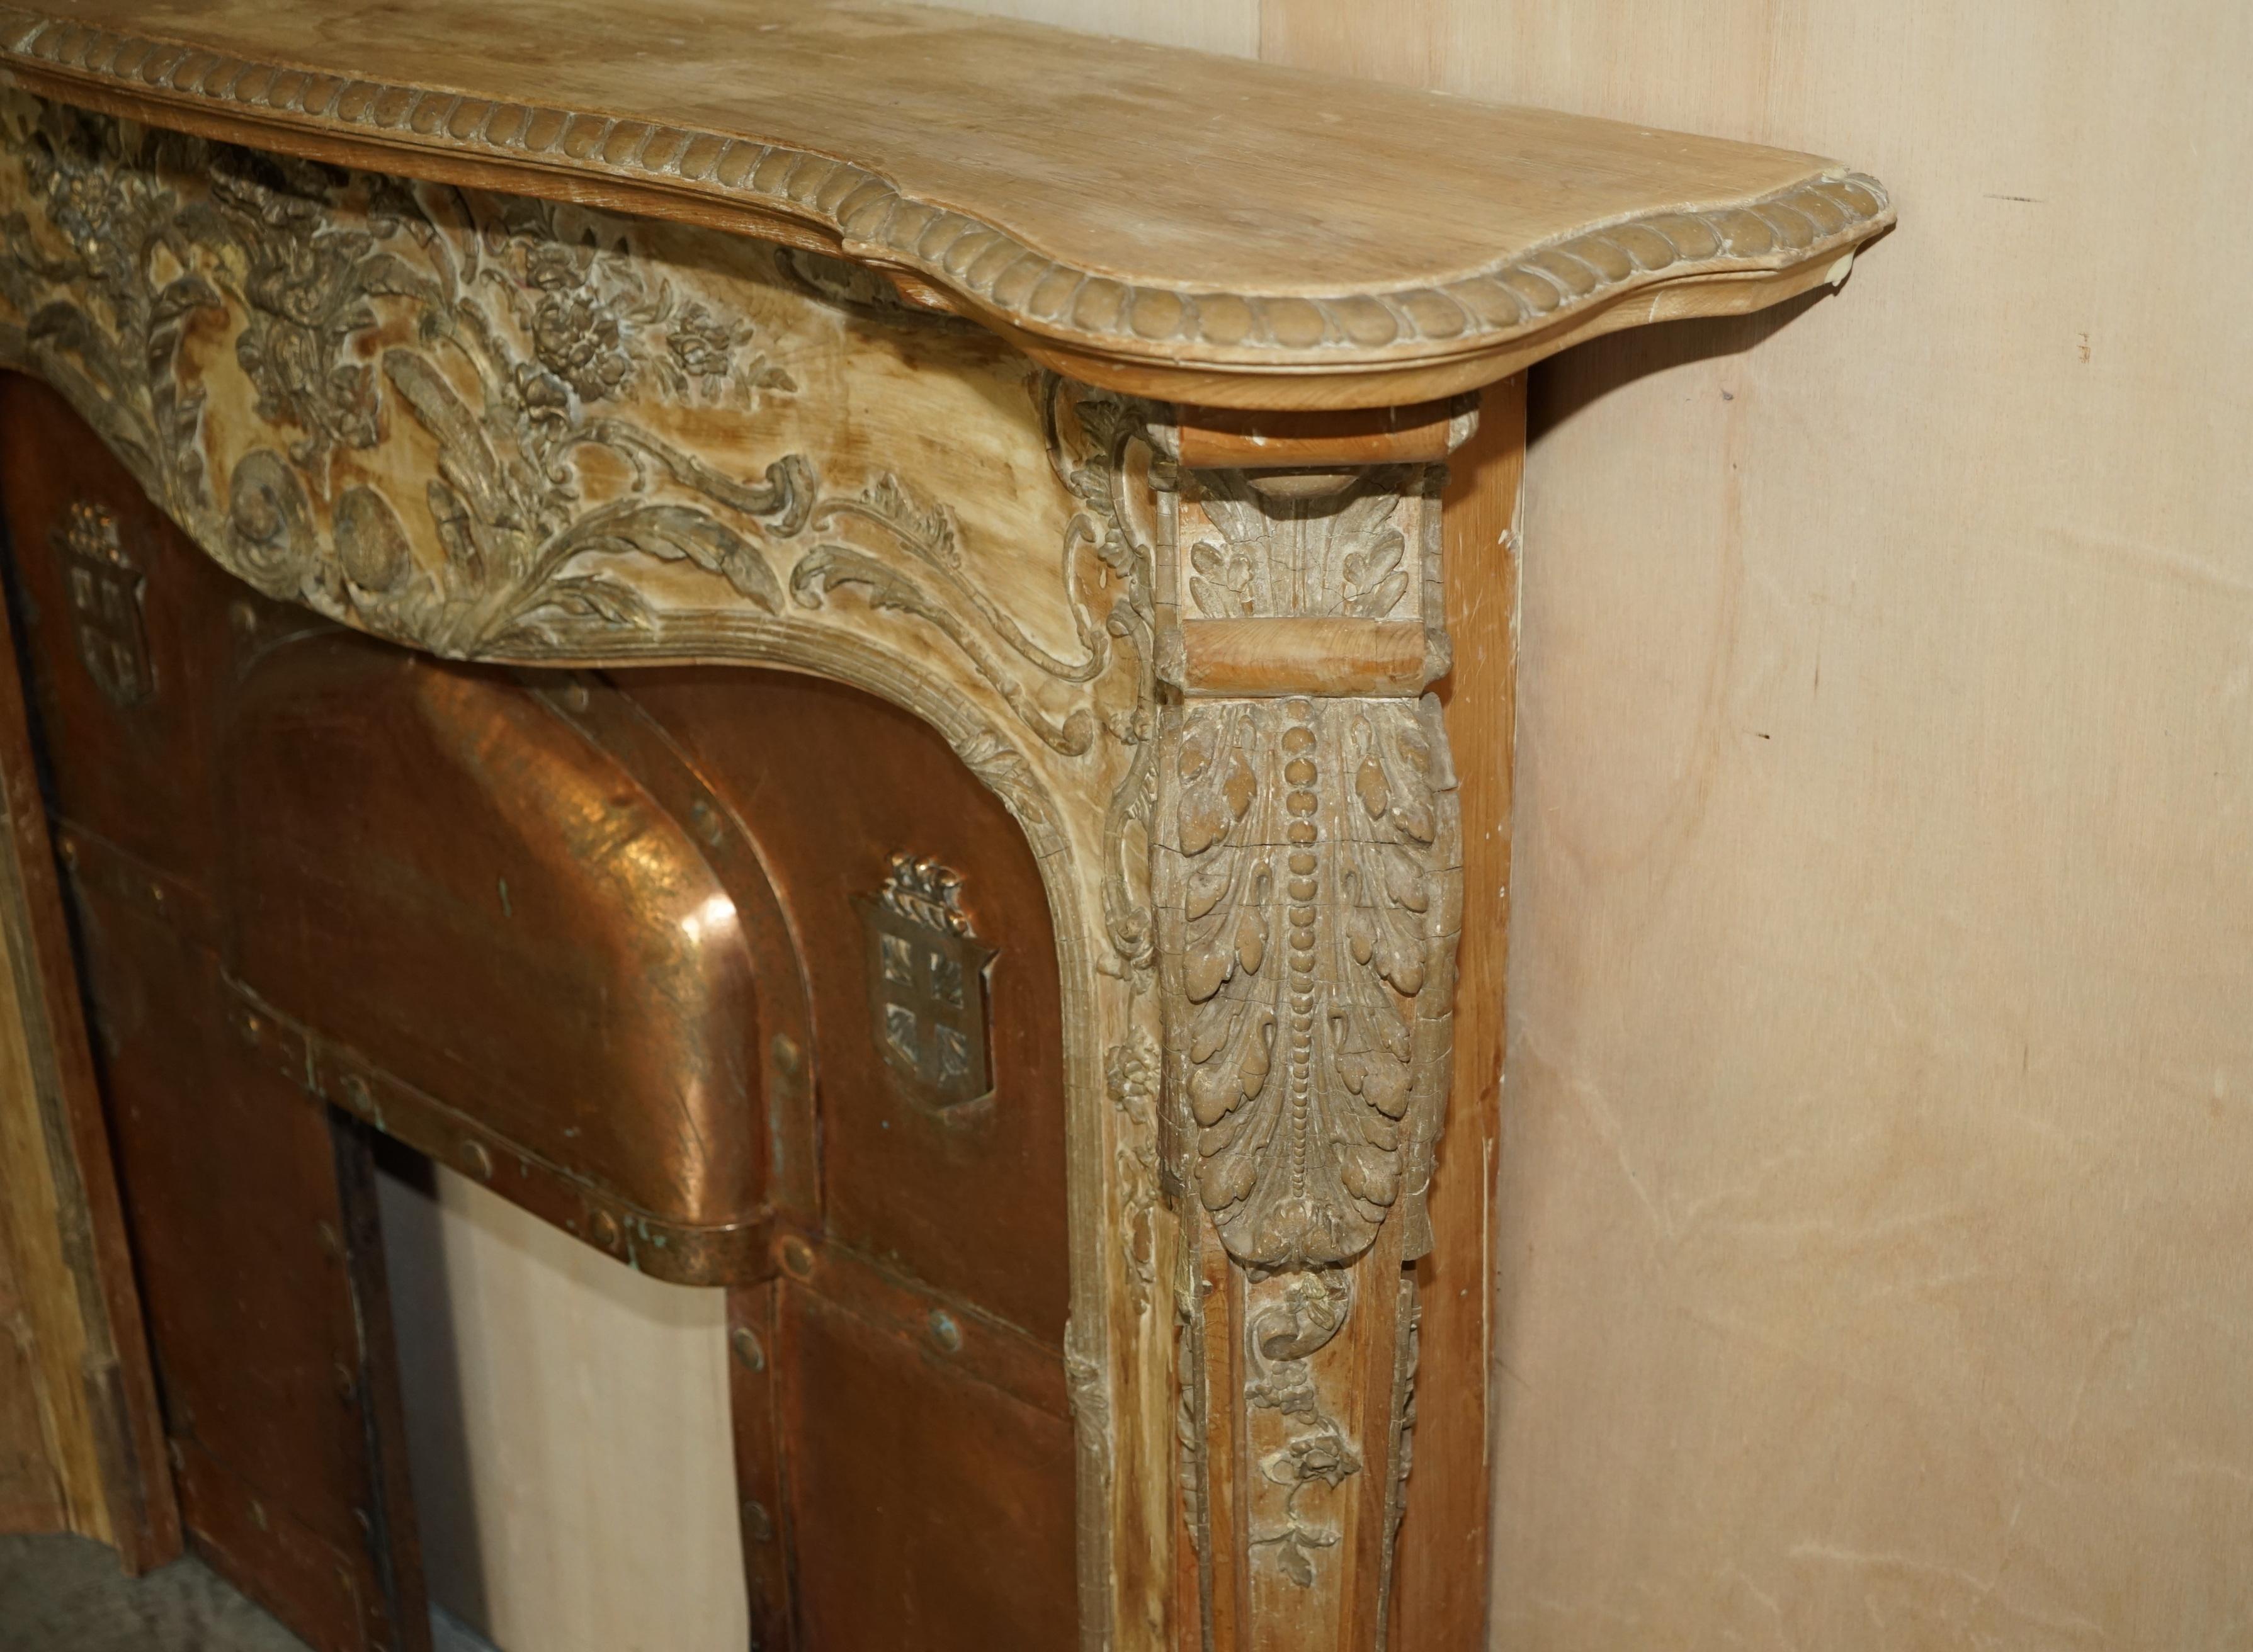 I'm delighted to offer for sale this very rare Antique hand carved Georgian Limed Oak Louis XV style fireplace with Arts & Crafts copper insert

What a find! Have you ever seen another fireplace this ornate, hand carved in oak and limed to this